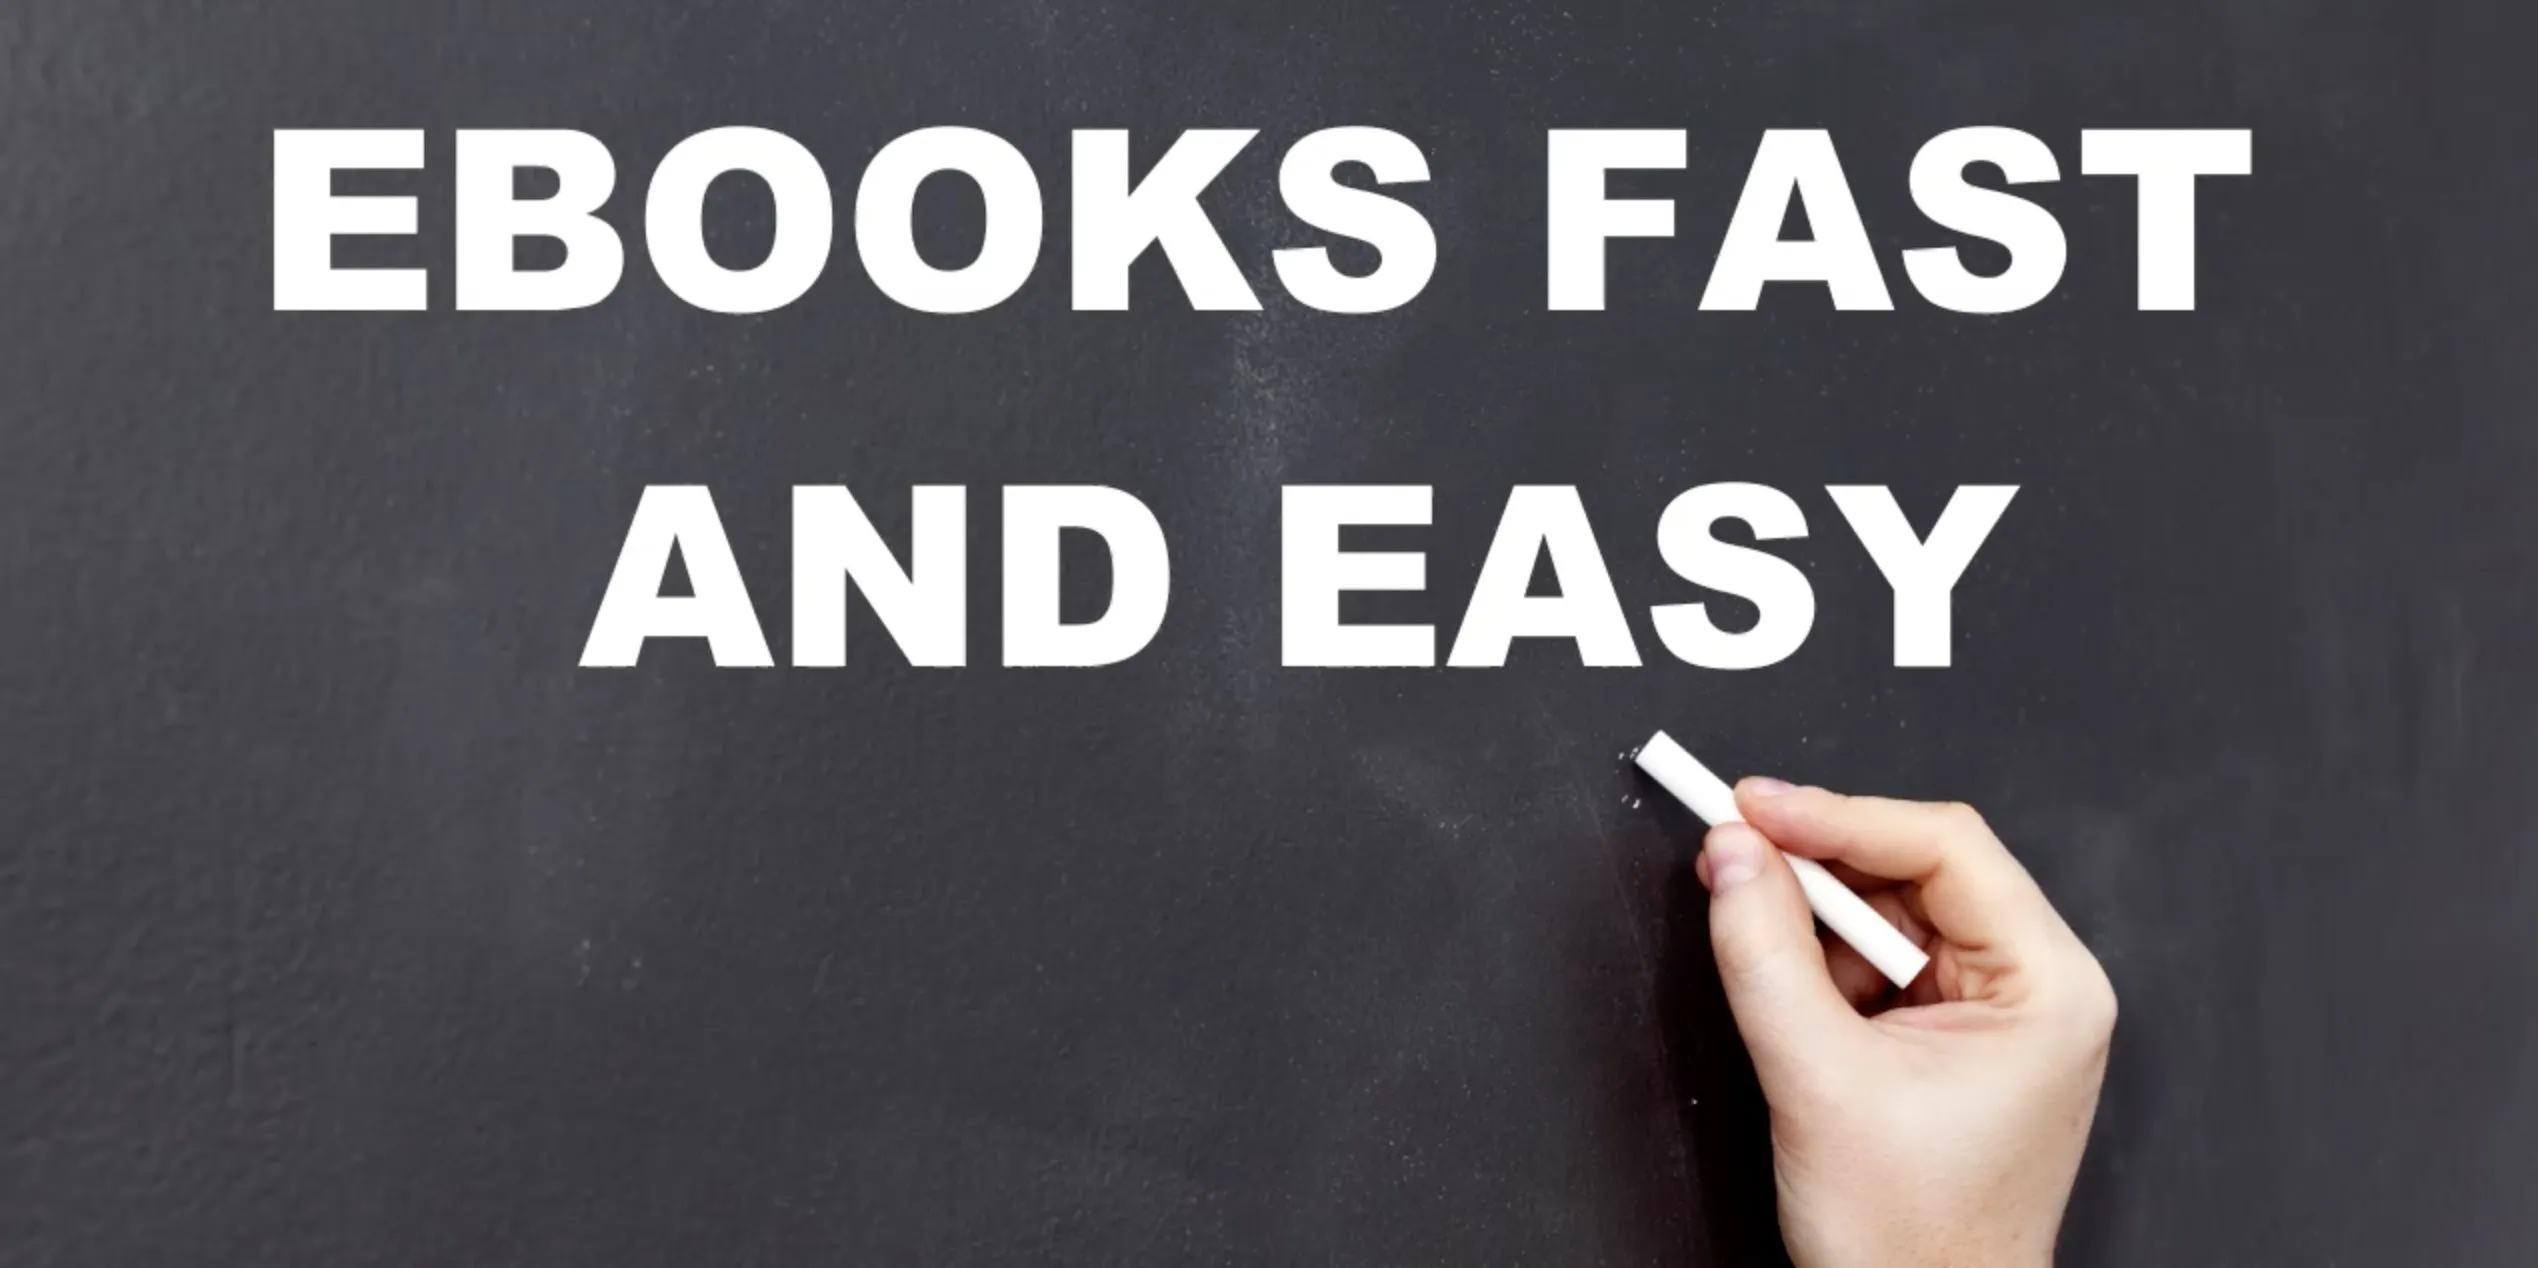 What is the Number One Reason We Make Ebooks? Promotion!